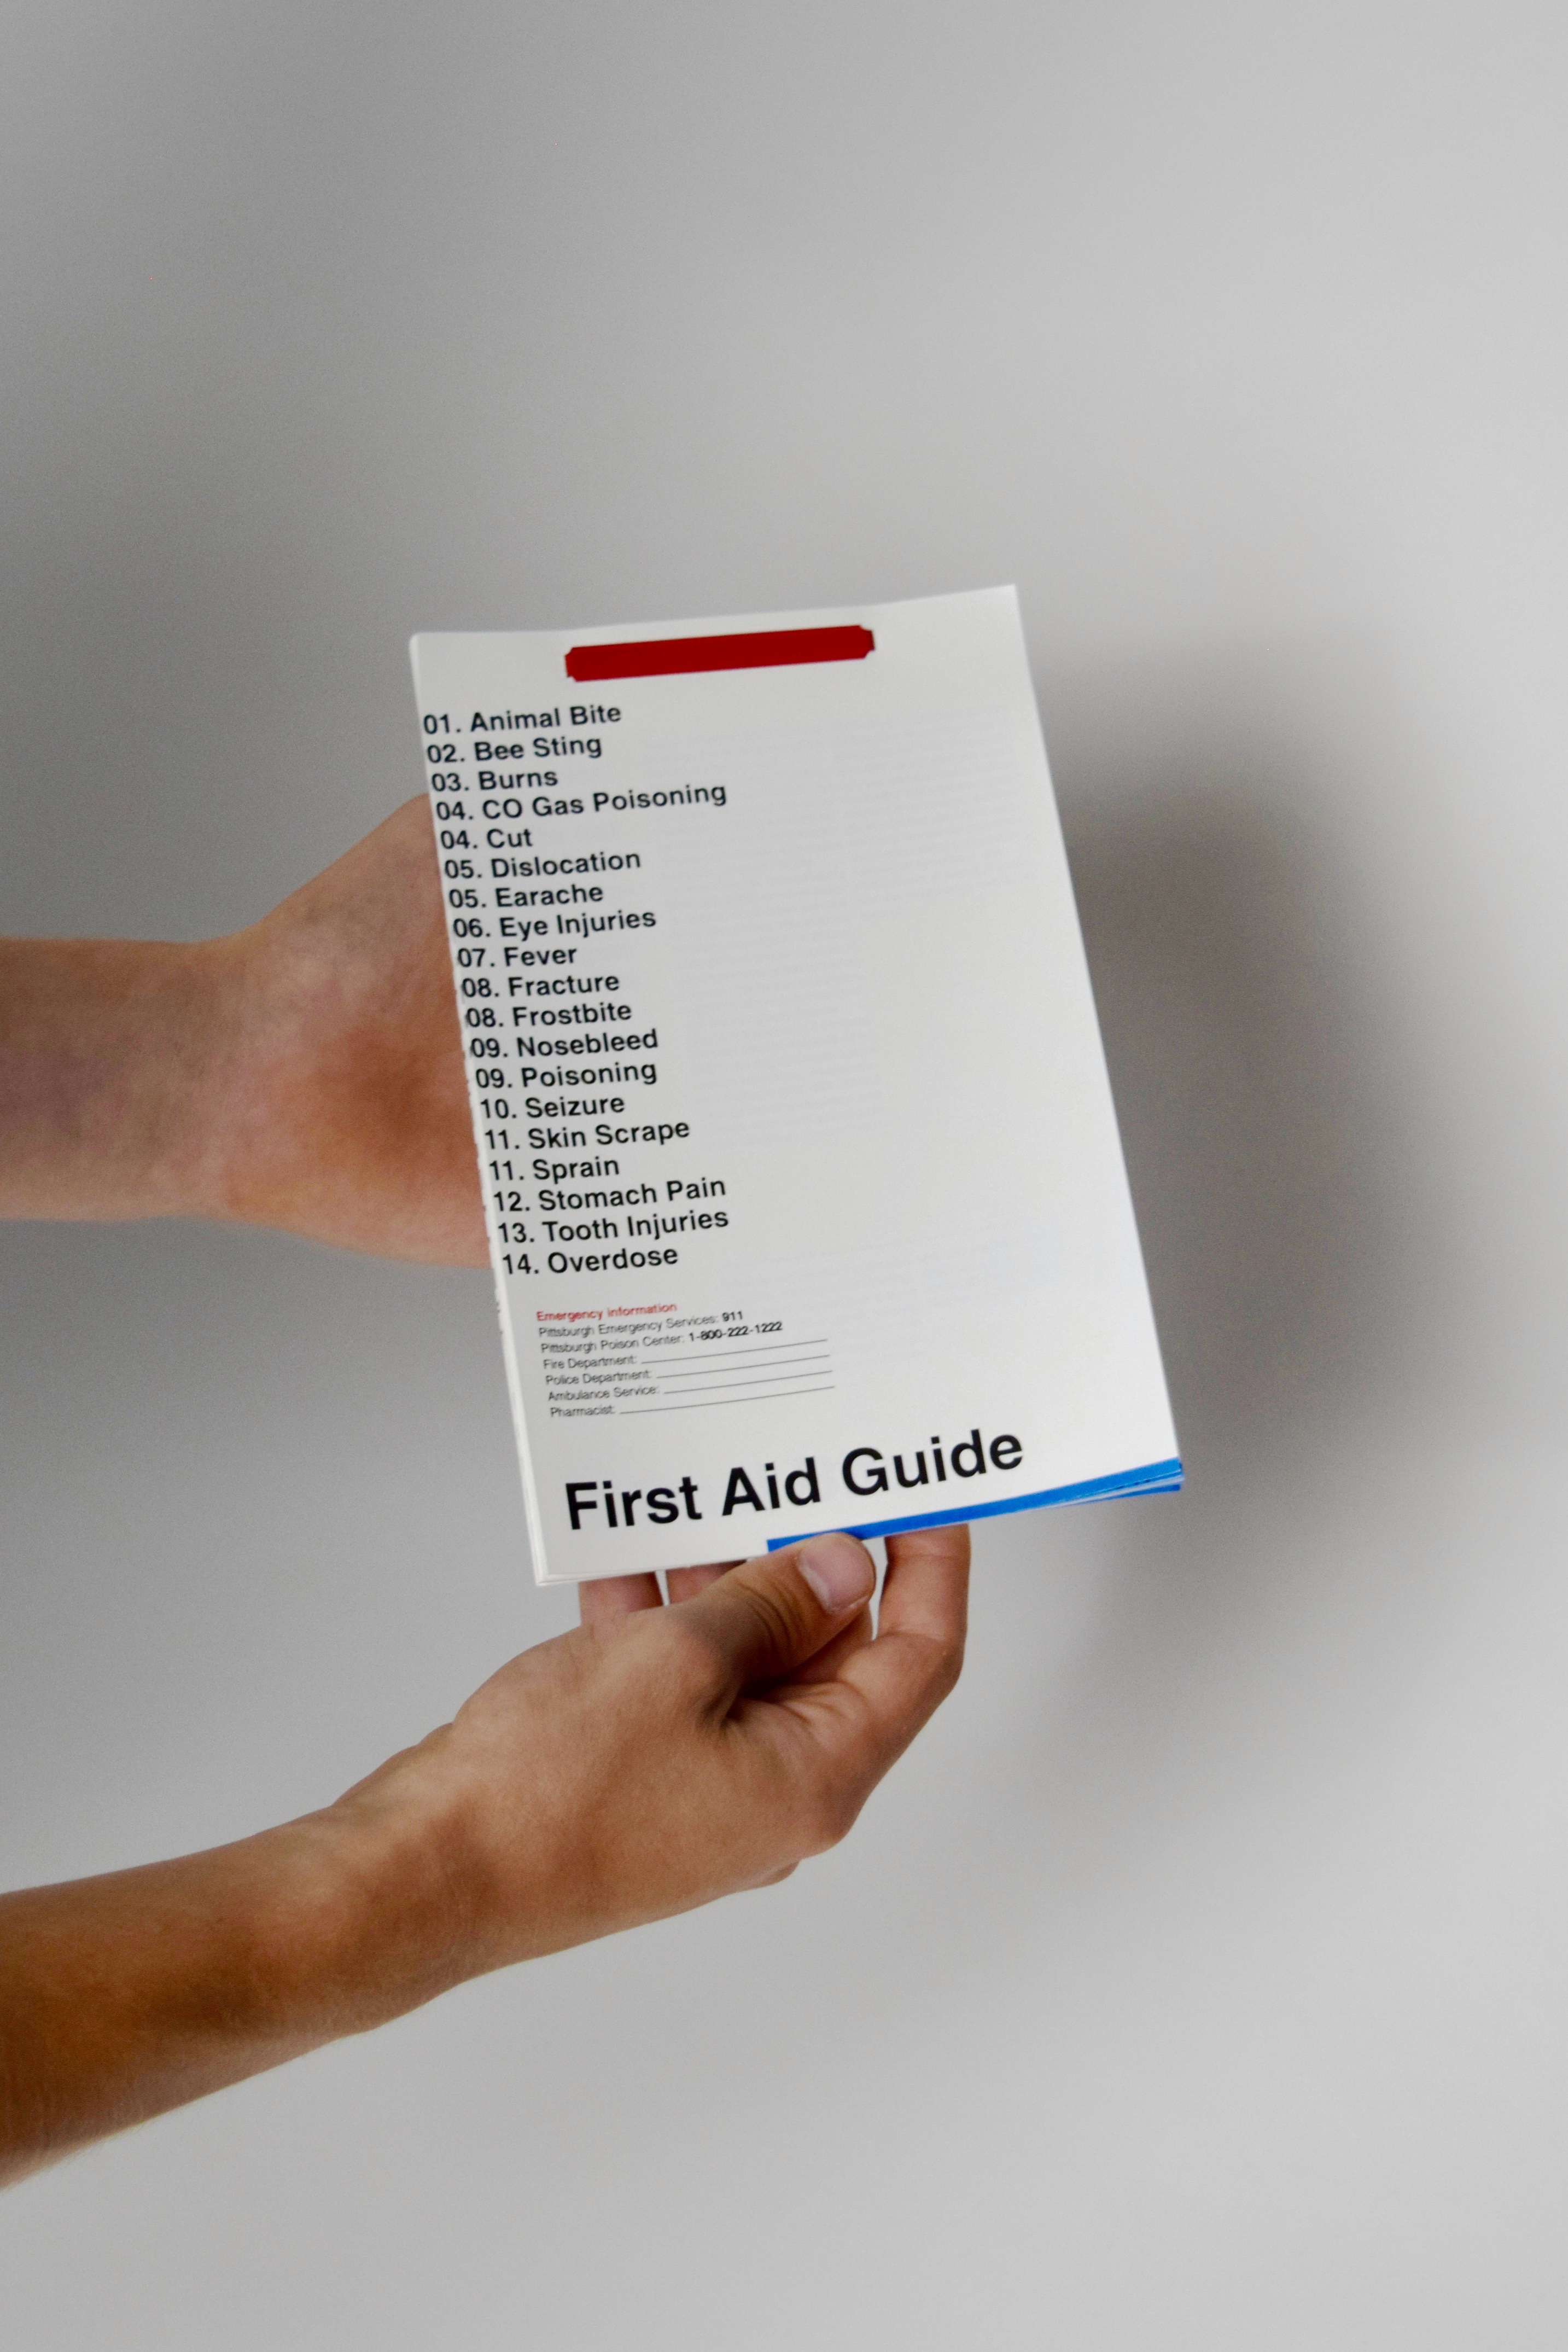 First Aid Guide.